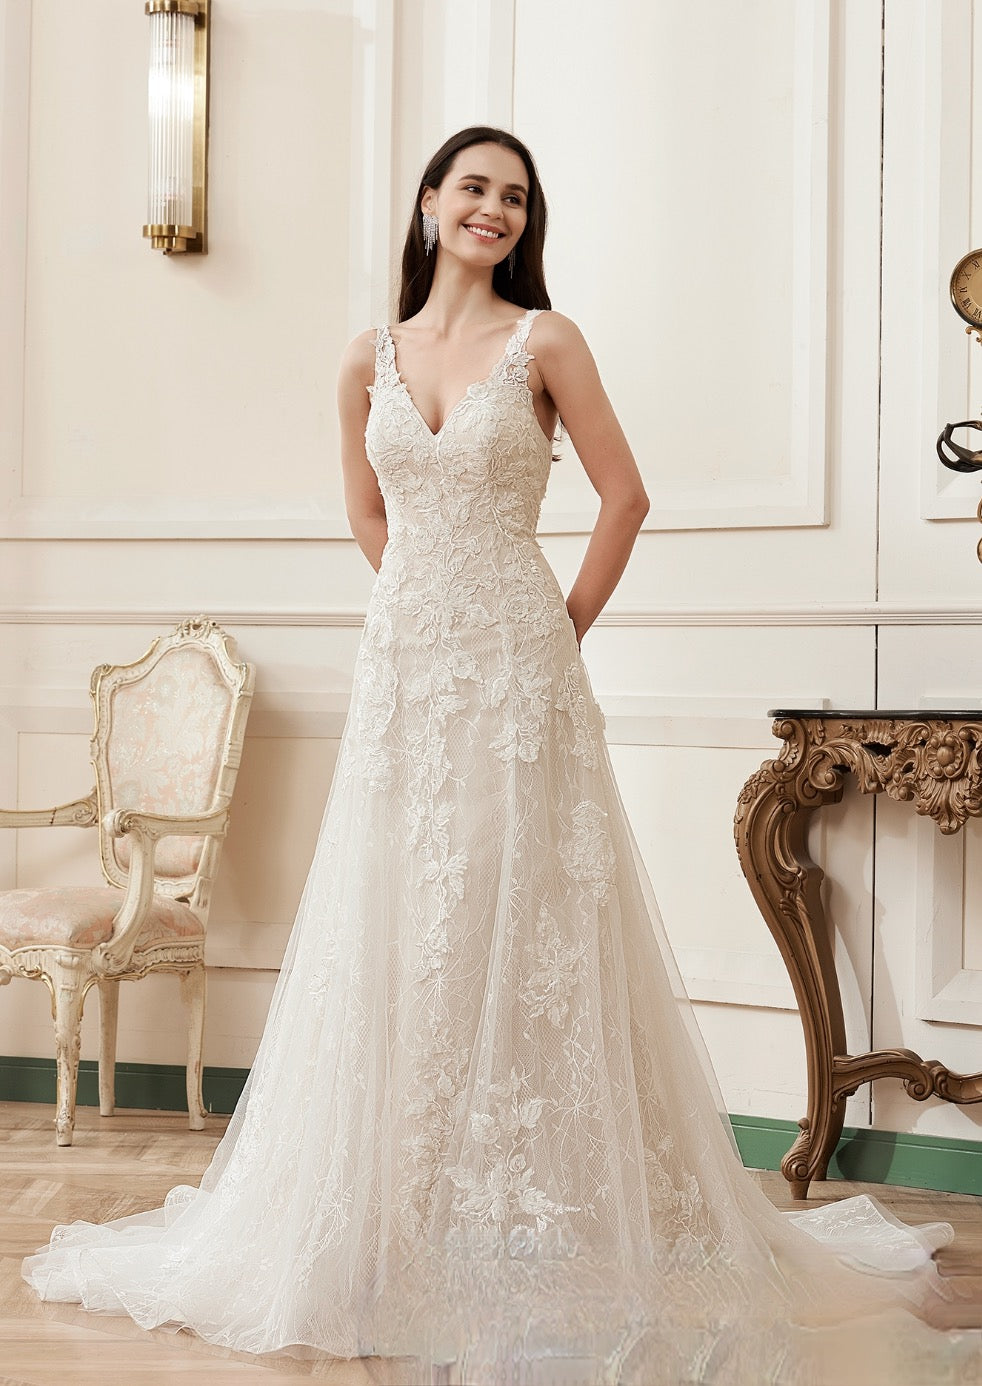 Romantic V-Neck A-Line Bridal Gown with Floral Applique – TulleLux Bridal  Crowns u0026 Accessories